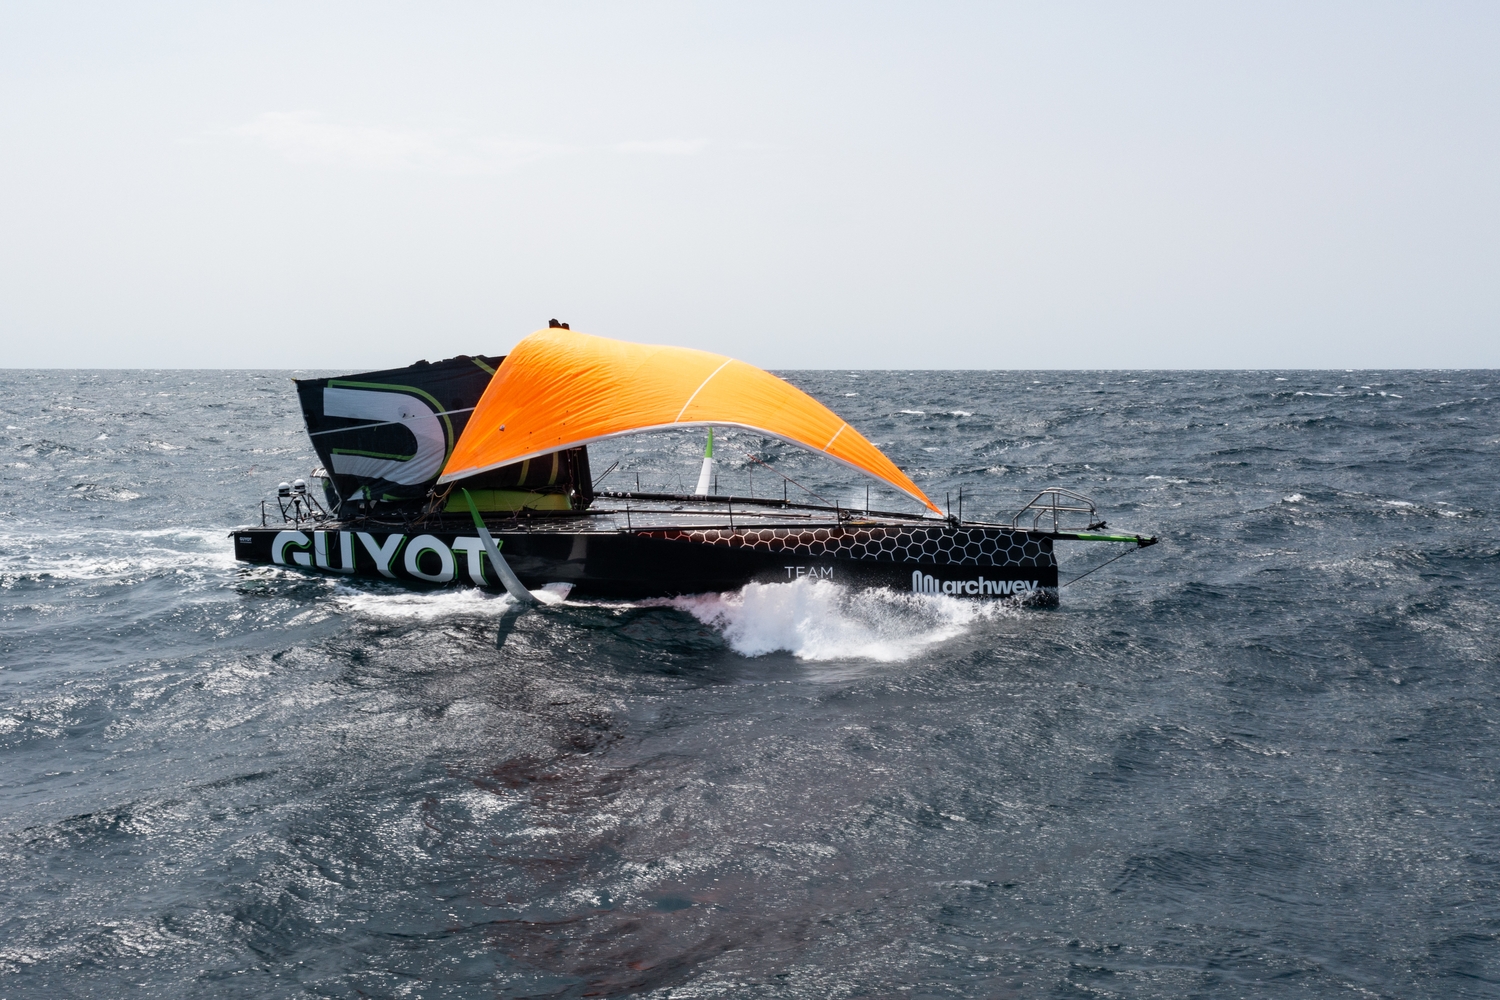 May, 2023, TOR, The Ocean Race, onboard, Leg 4, GUYOT environnement - Team Europe, 2022-23, Day 18, jury-rig, storm jib, mainsail, dismasted, damage, drone, aerial, ocean, Nature, horizon, bow, bowsprit, foil, mast